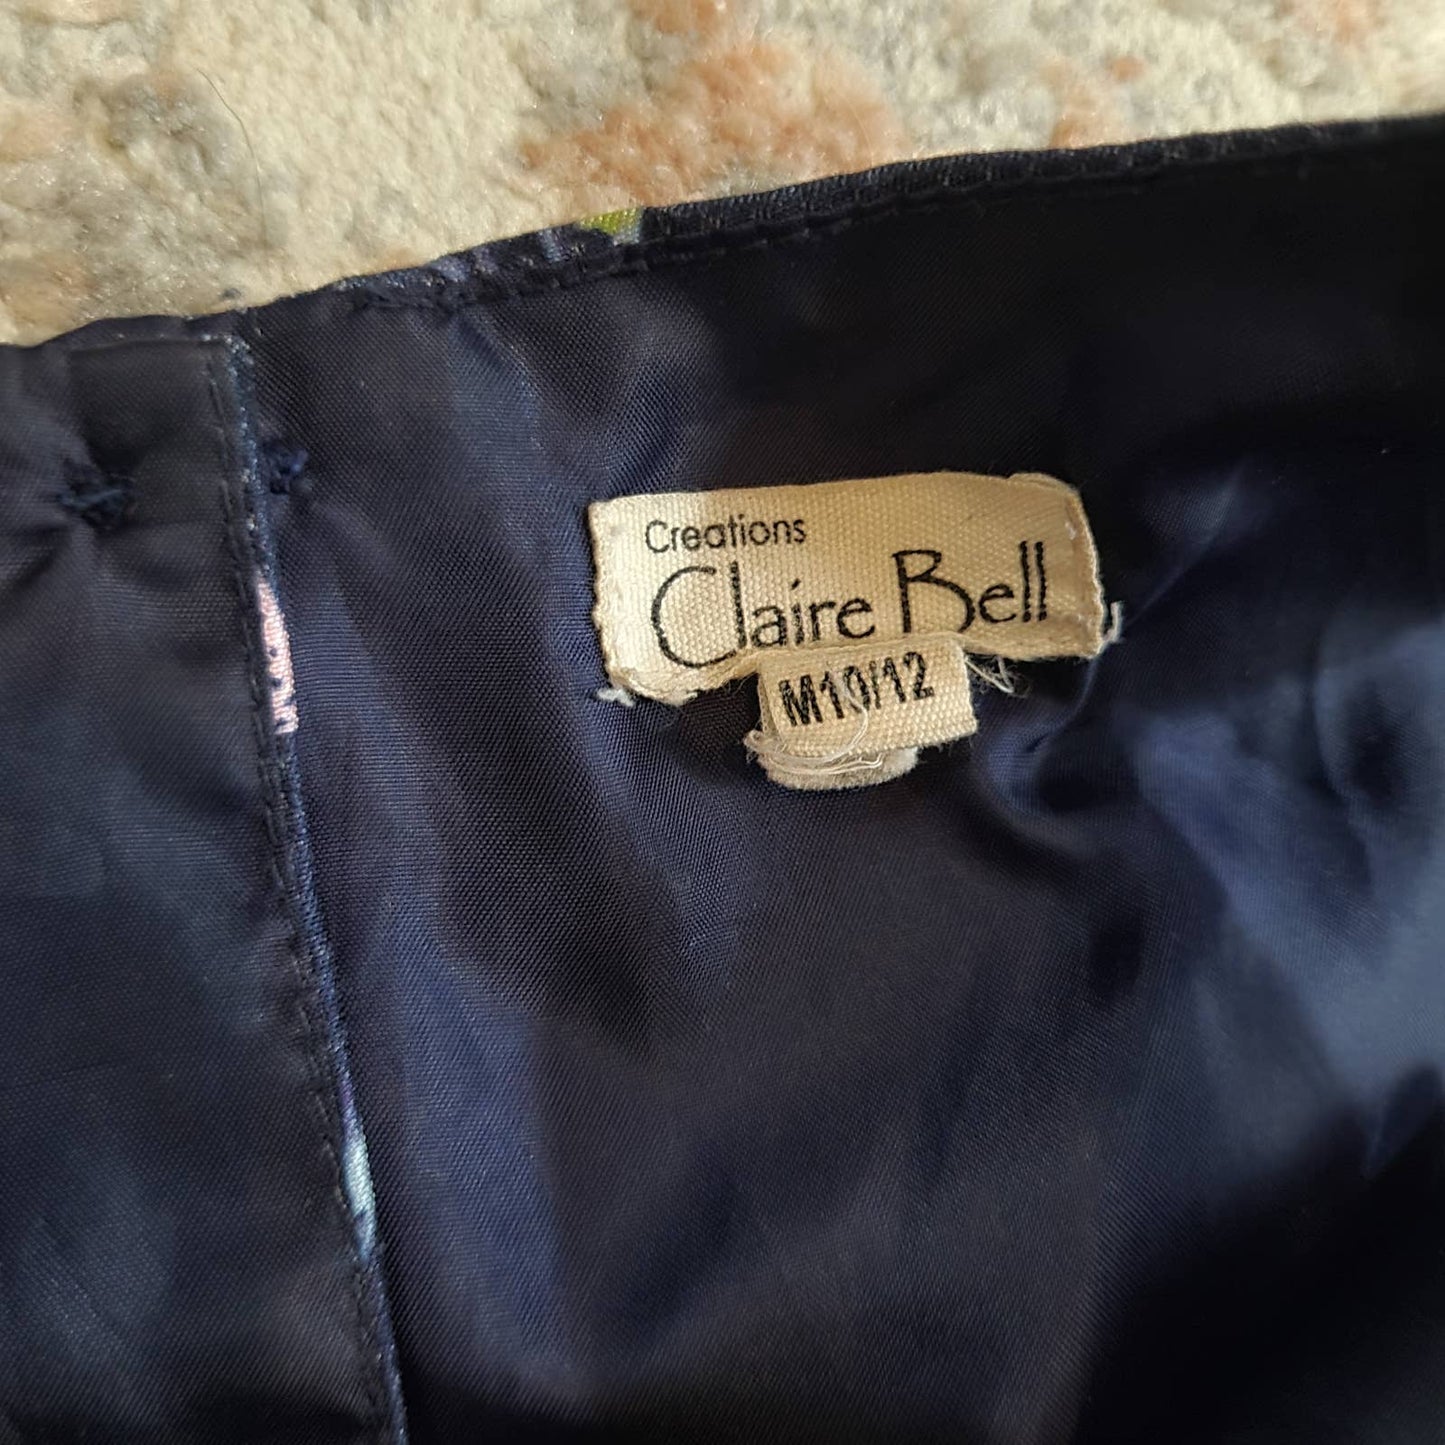 Claire Bell Creations - Size Medium (10/12)